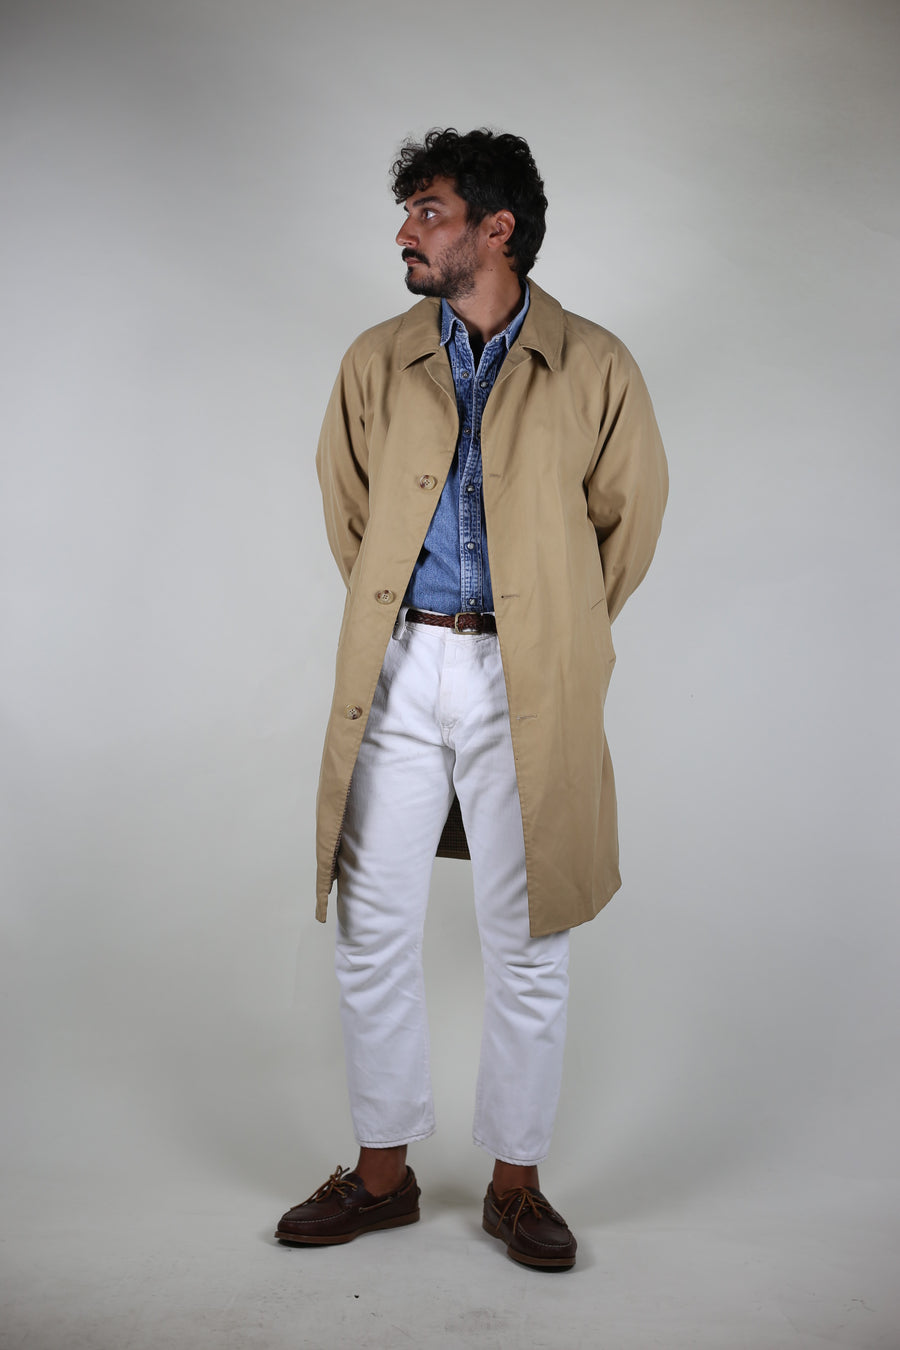 Trench vintage - XL -